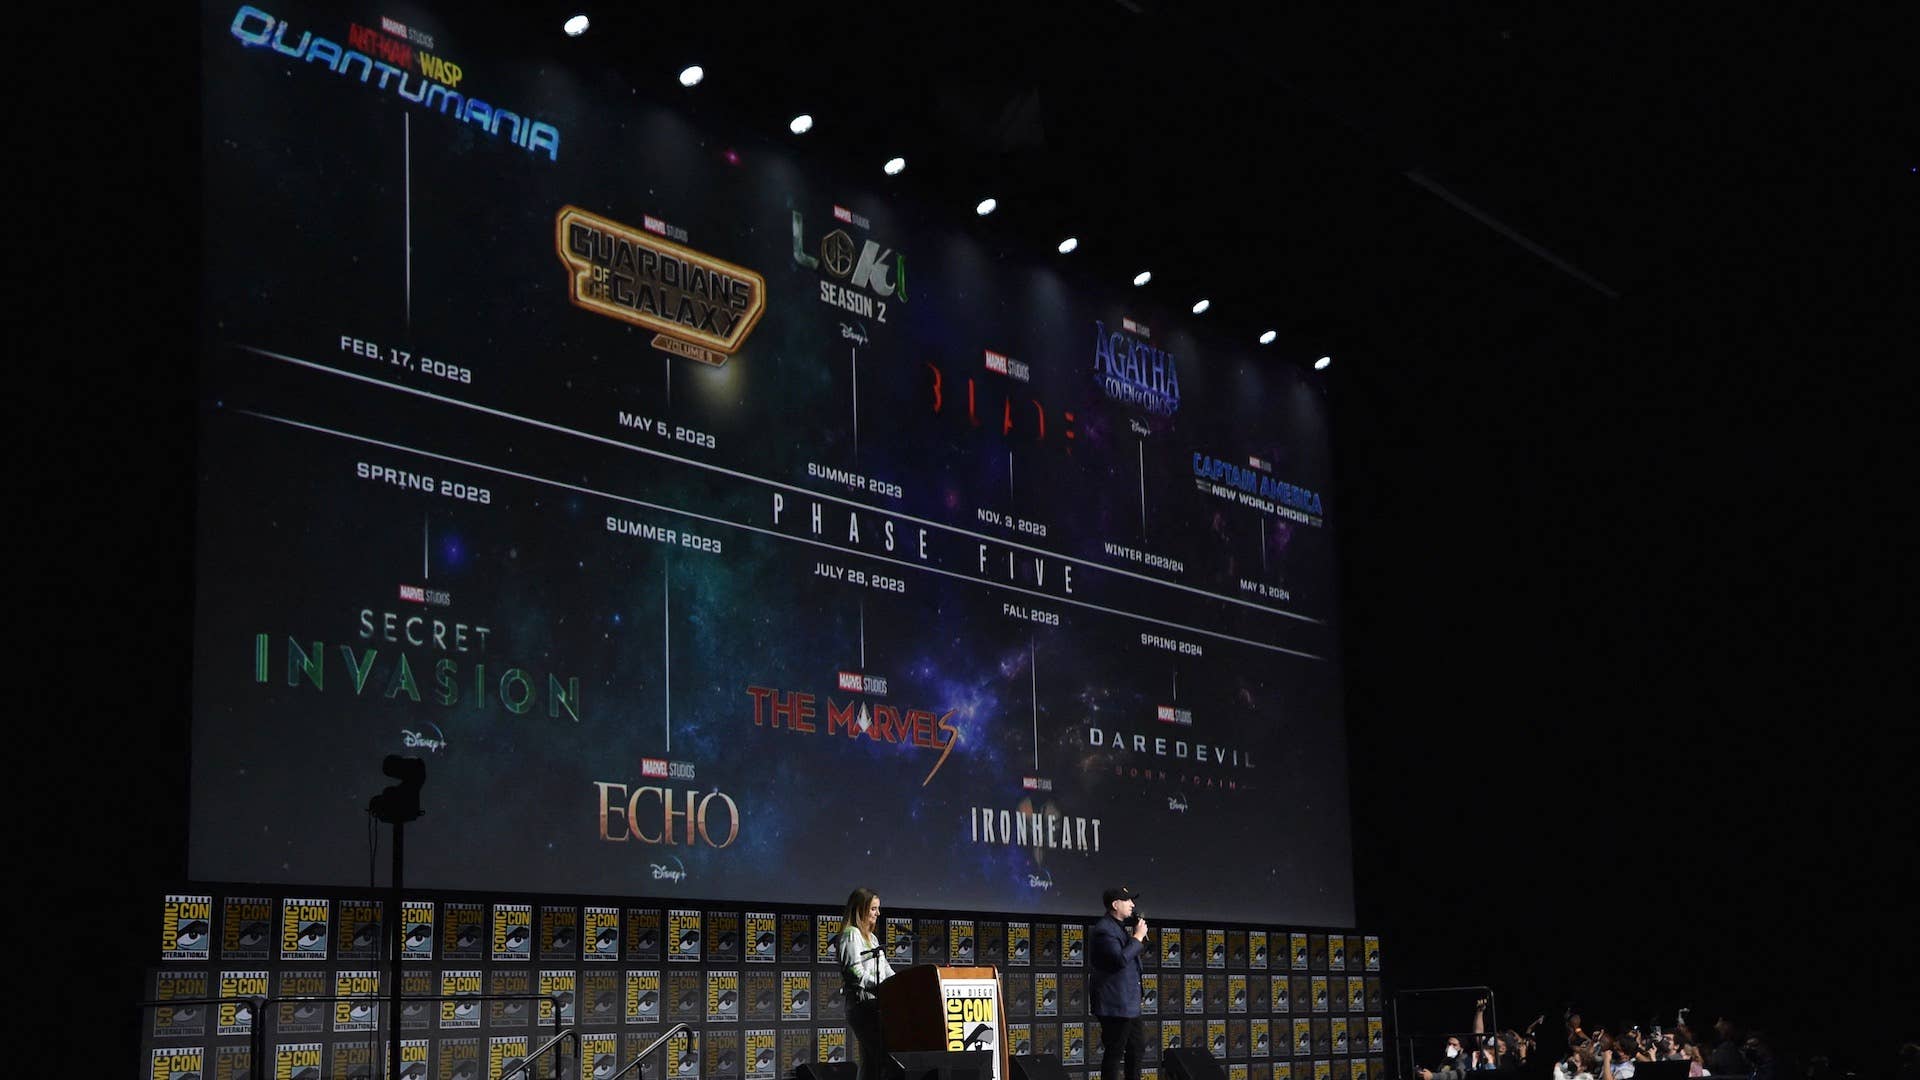 Kevin Feige speaks during the Marvel panel at Comic Con